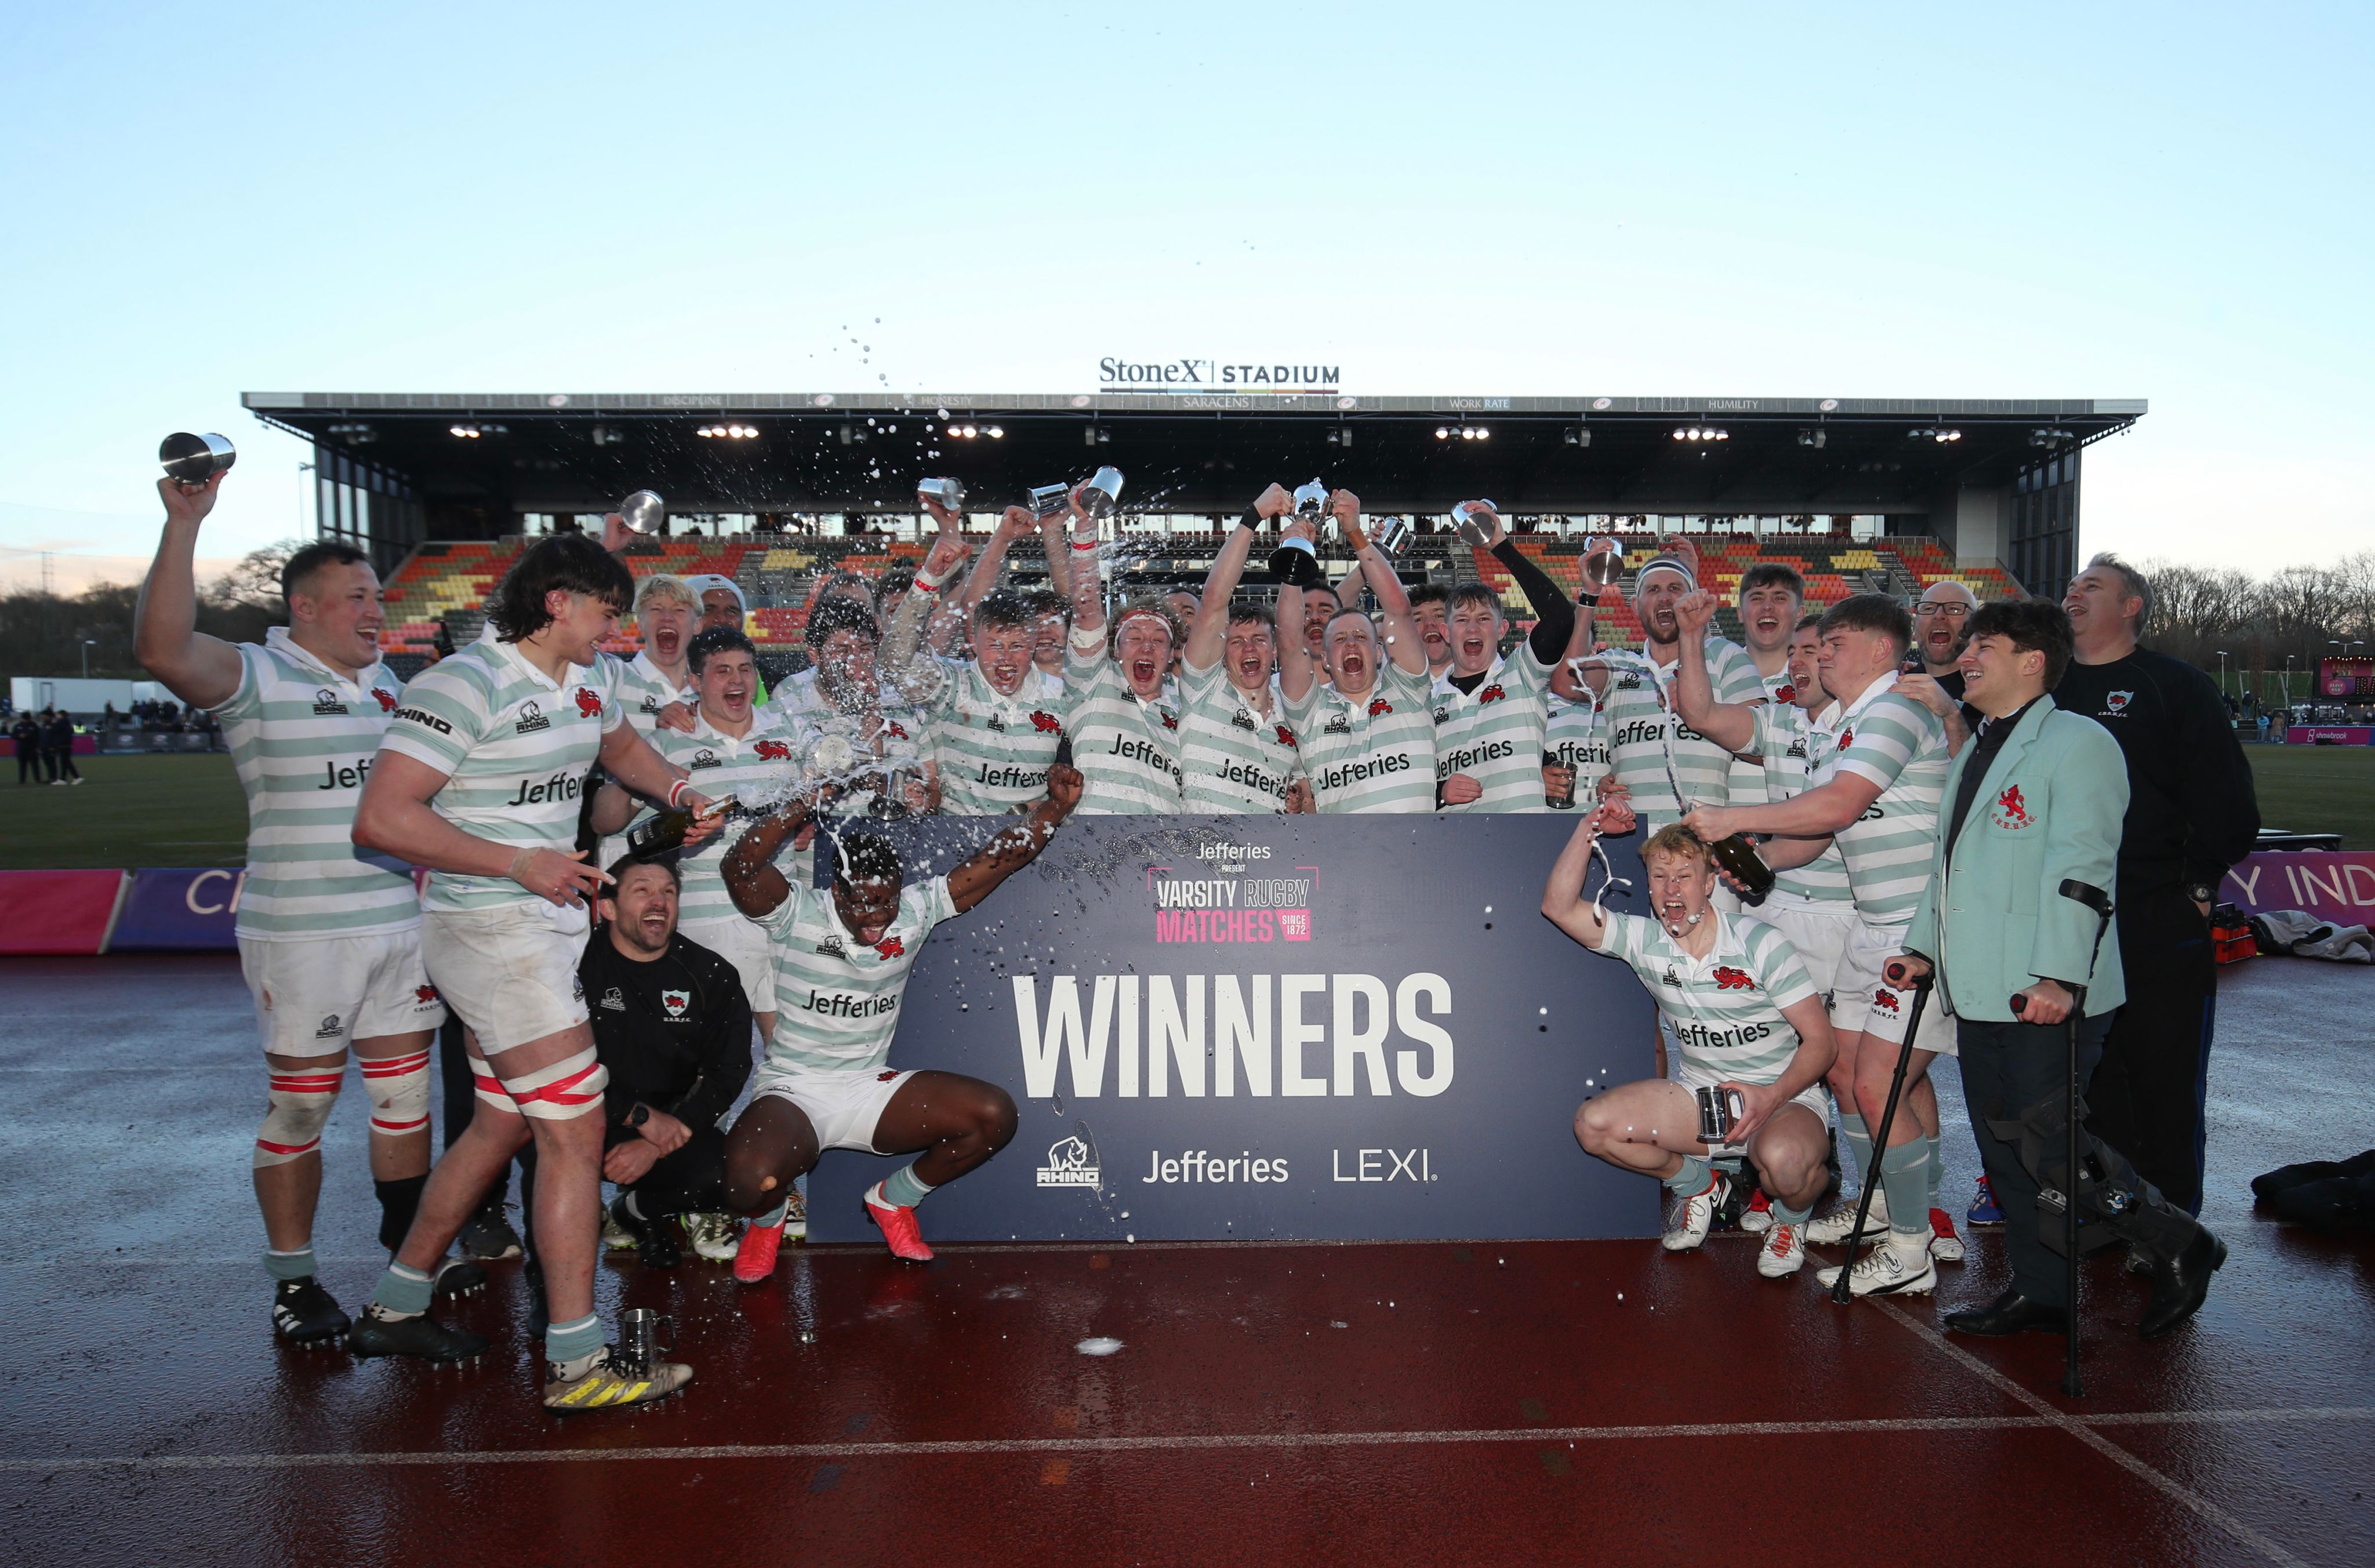 The men's rugby team cheering and holding up the winning trophy